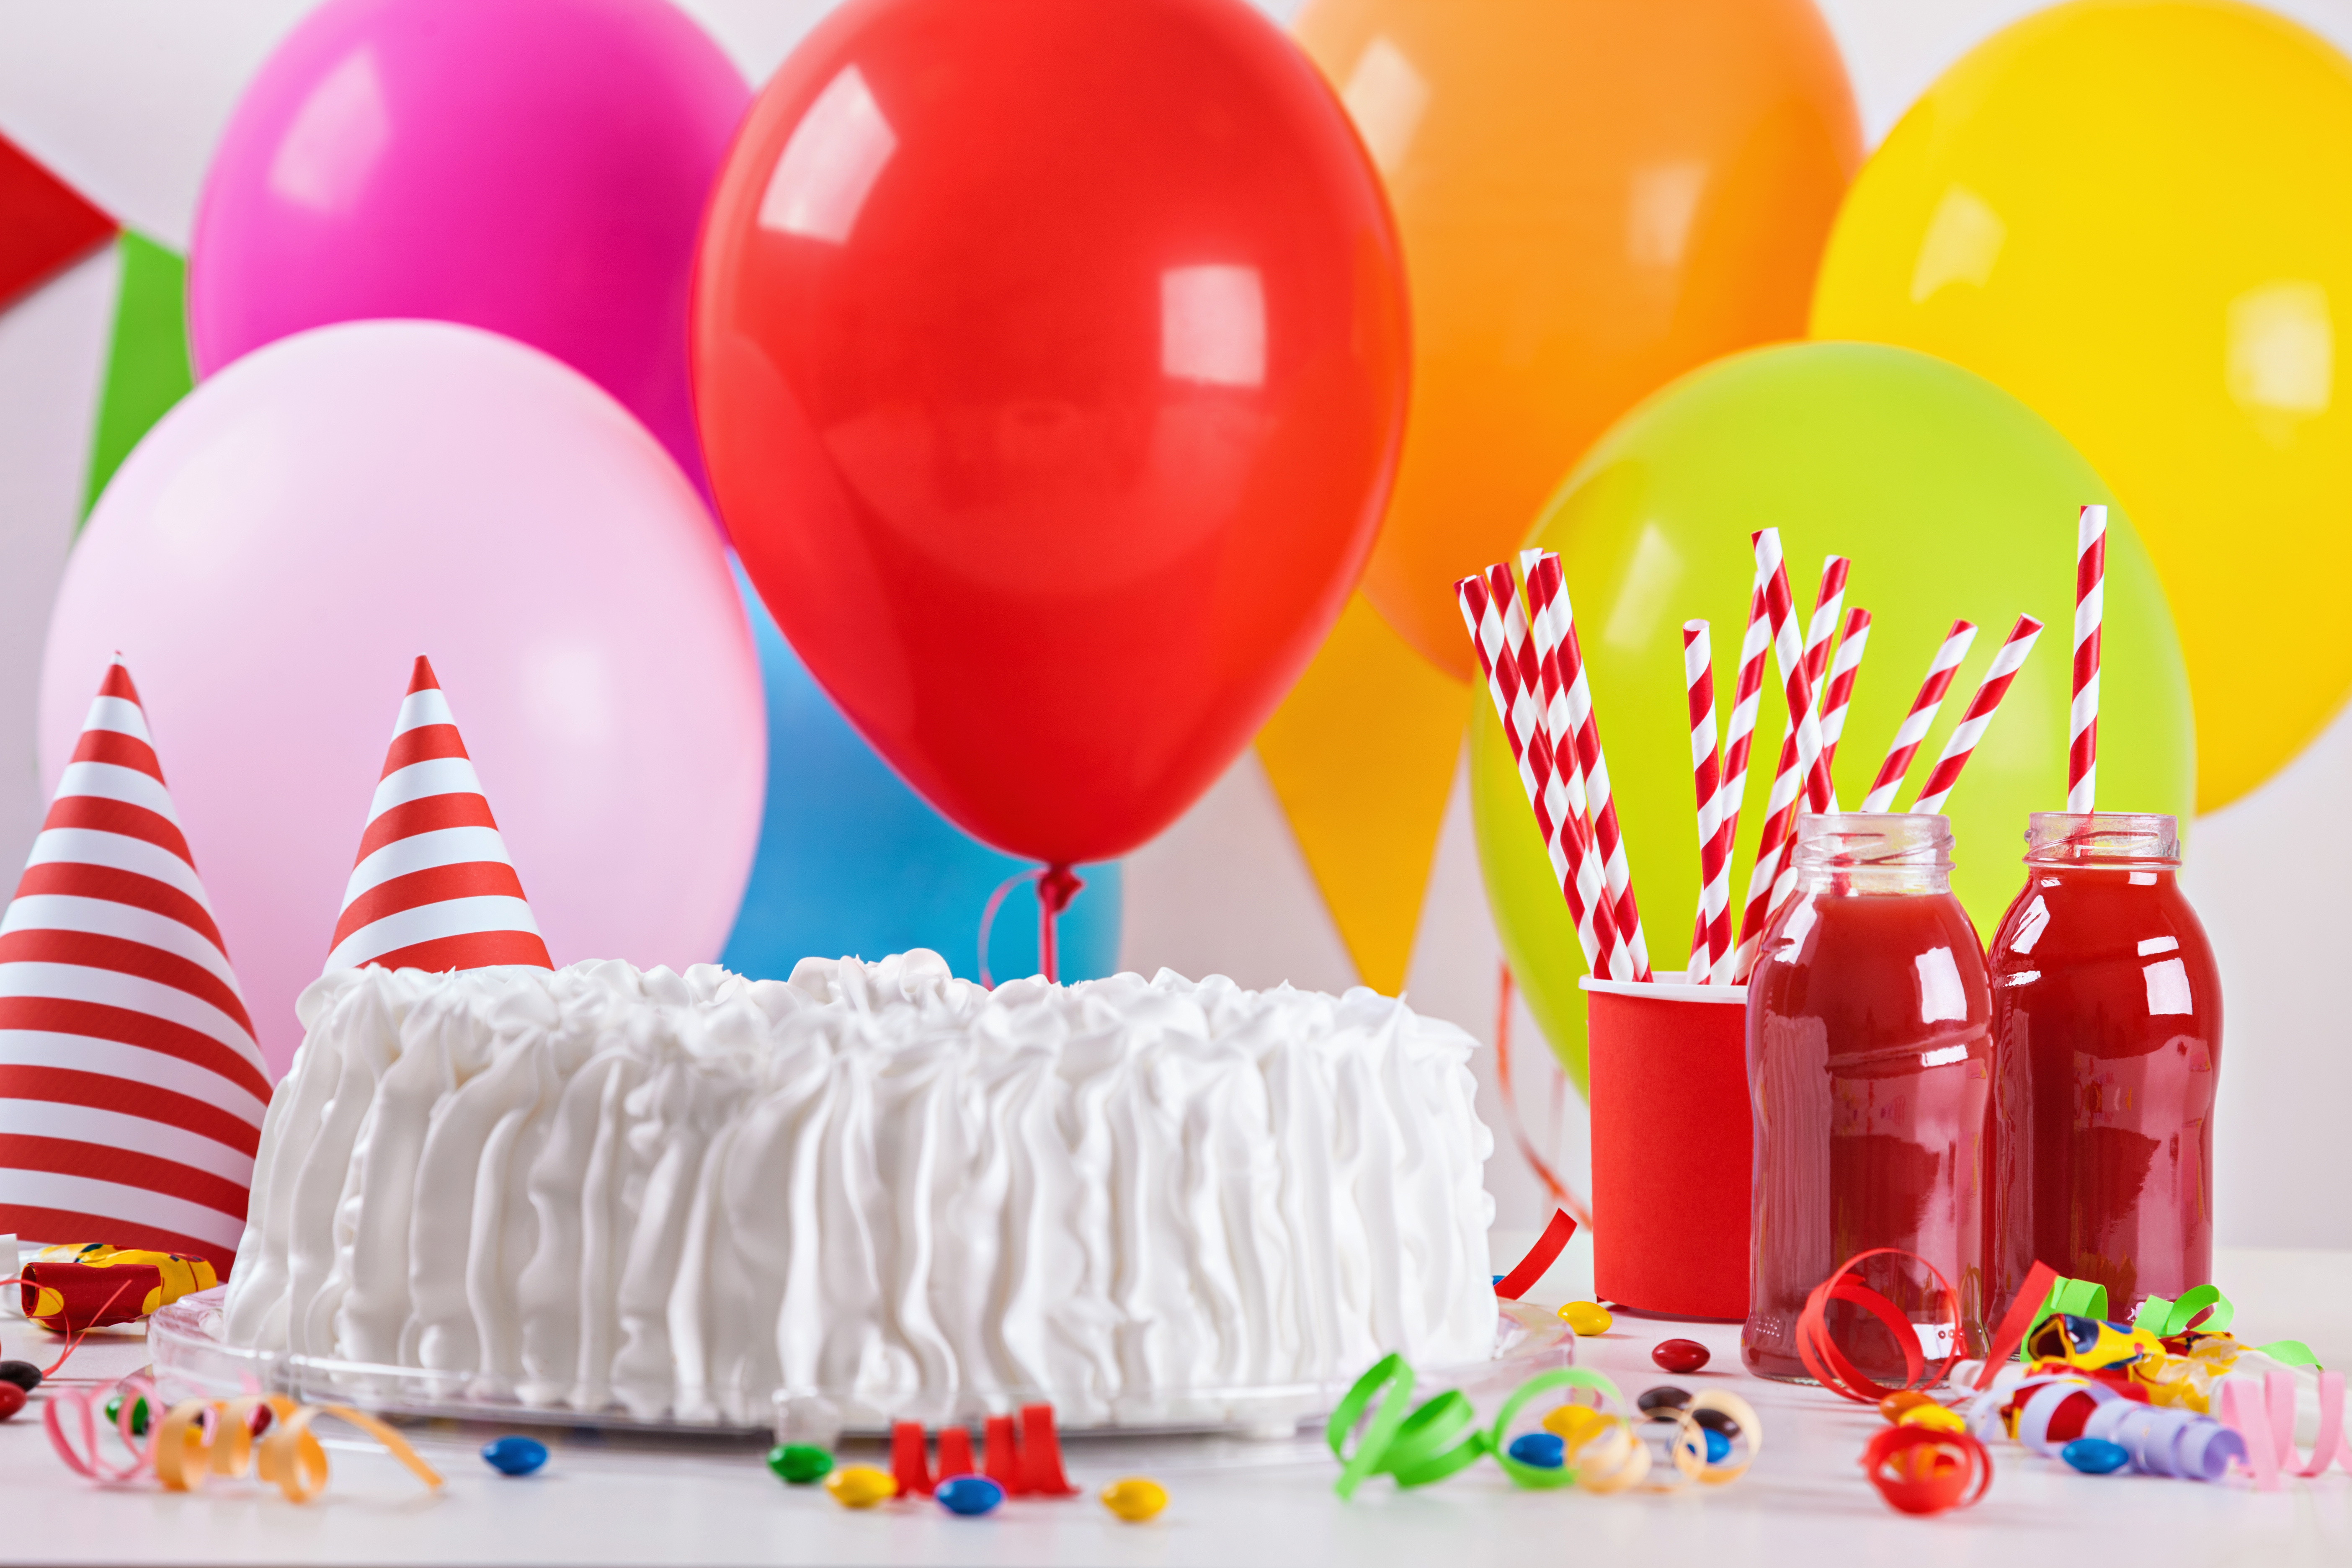 The 10 Best Party Supplies Sites in 2021 | Sitejabber Consumer Reviews